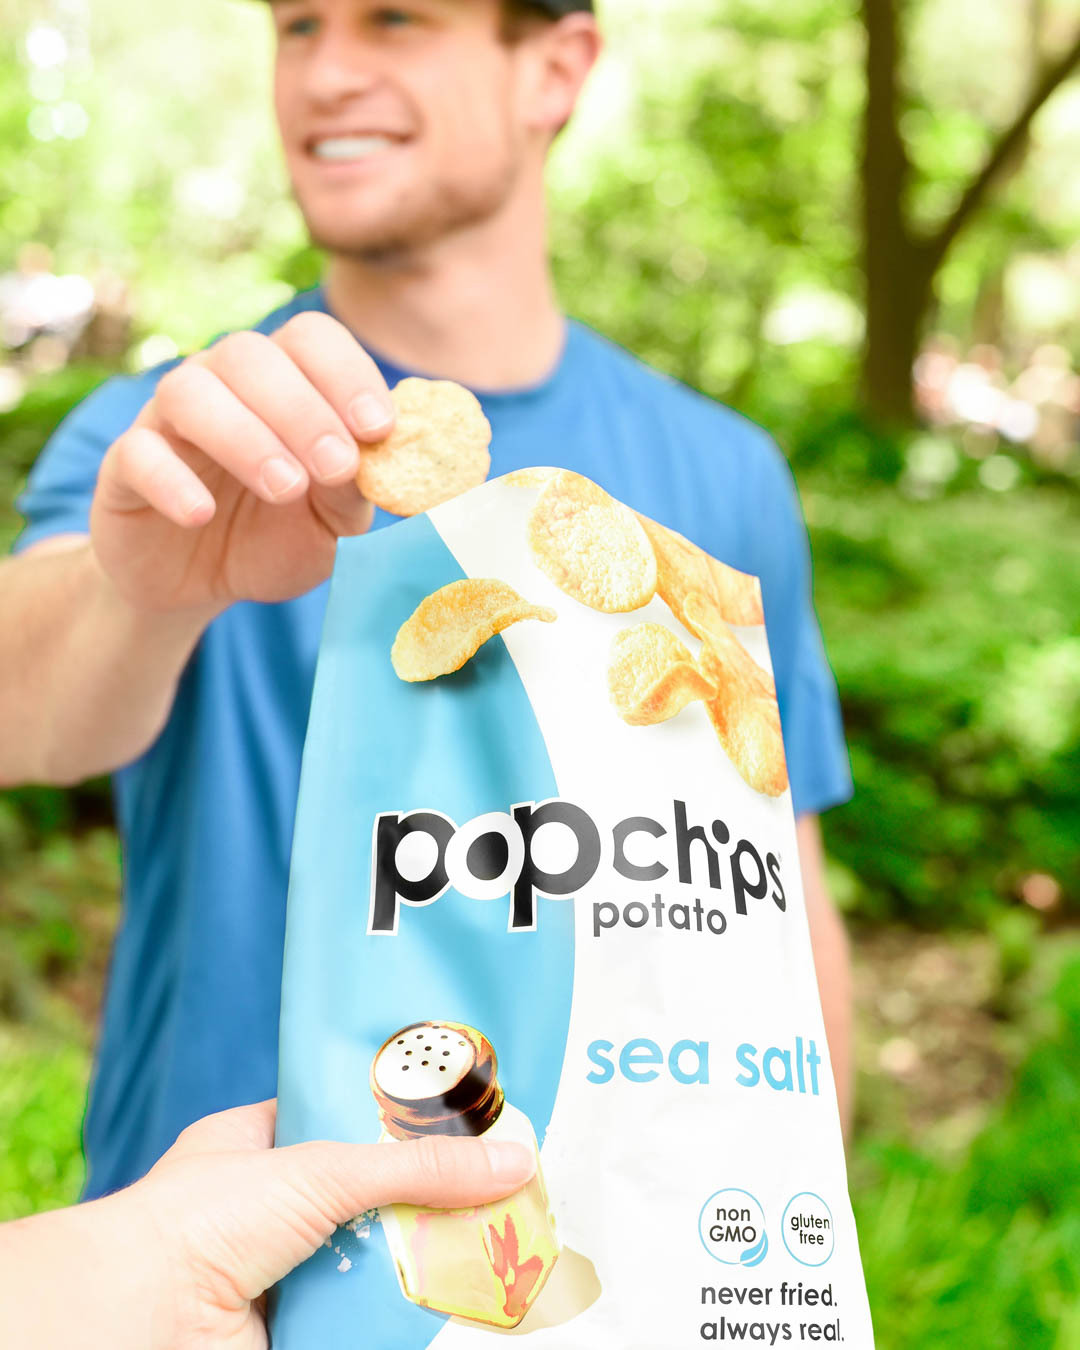 Popchips variety pack, 6 CT - image 5 of 6